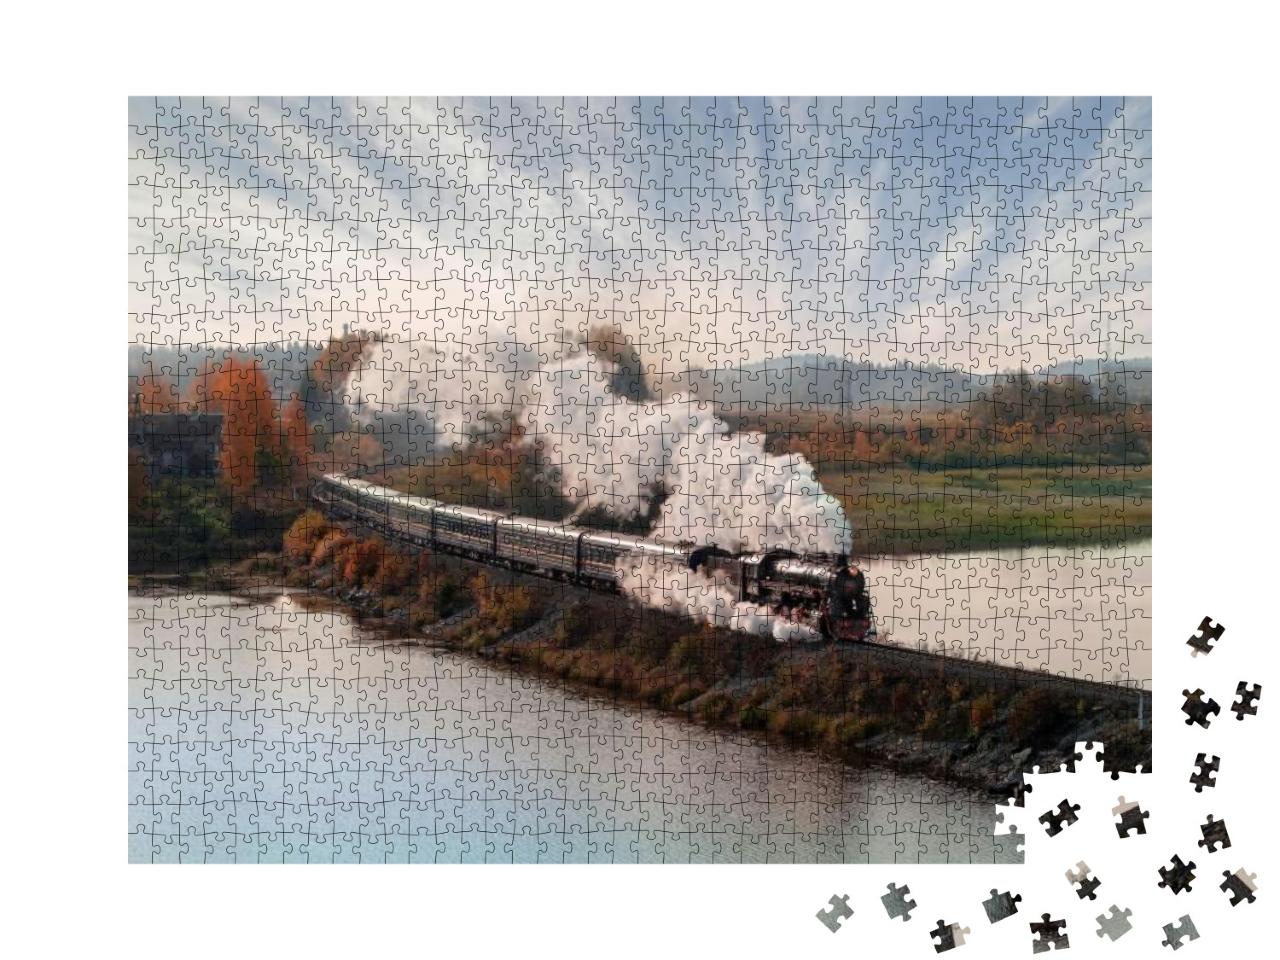 Vintage Steam Locomotive Train in the Autumn Landscape... Jigsaw Puzzle with 1000 pieces